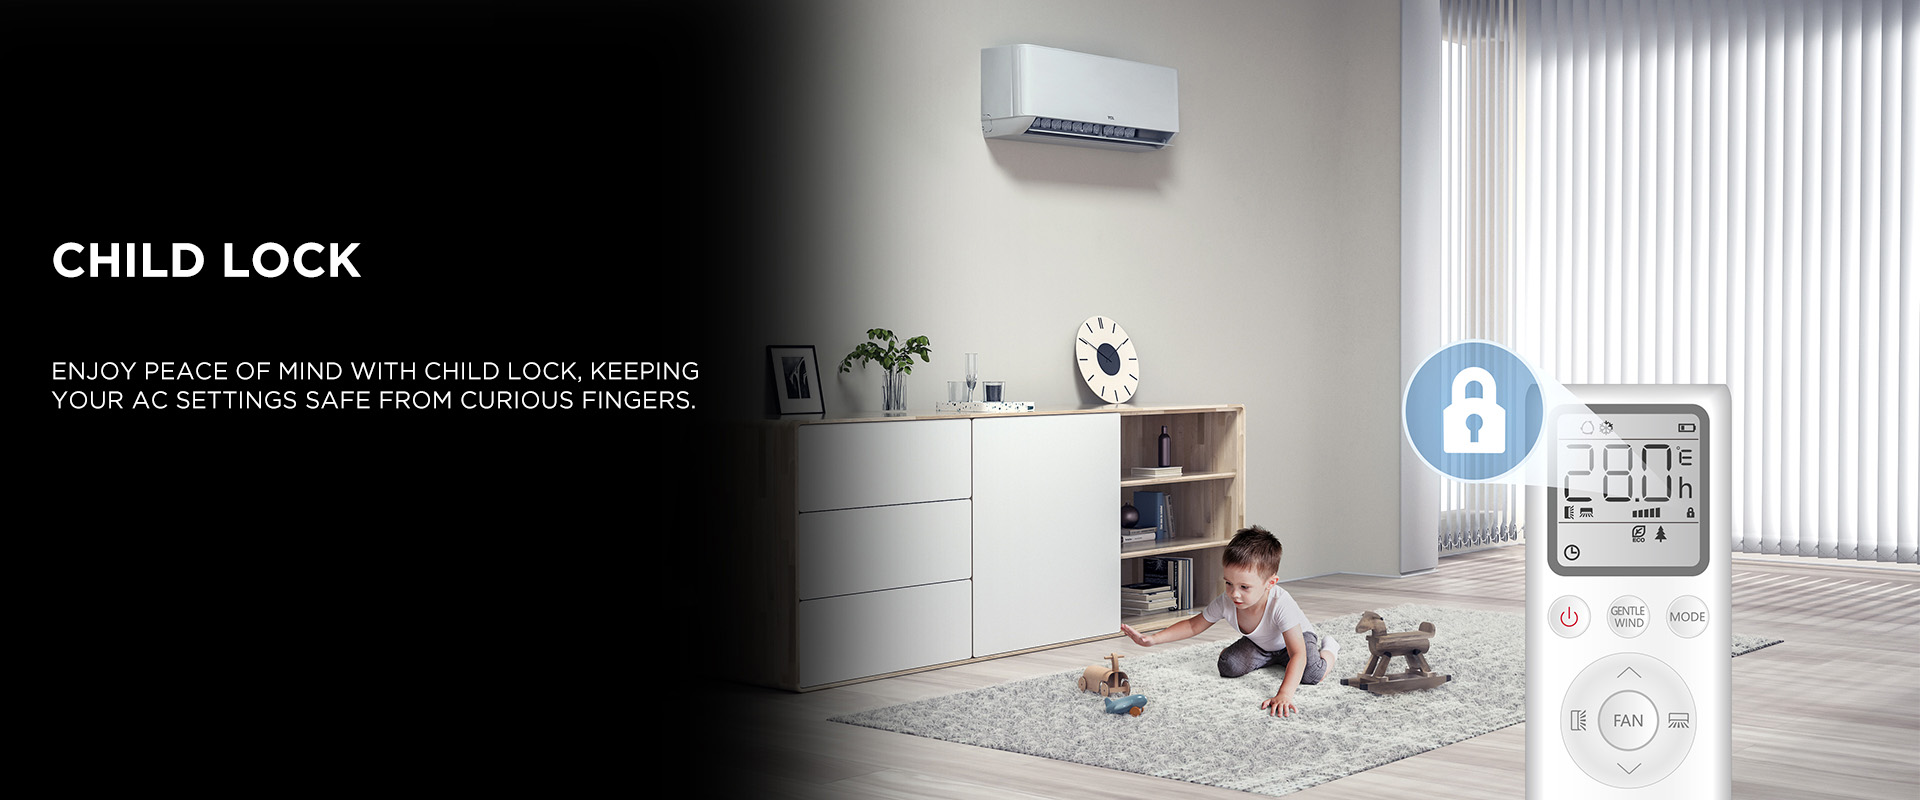 Enjoy peace of mind with Child Lock, keeping your AC settings safe from curious fingers.